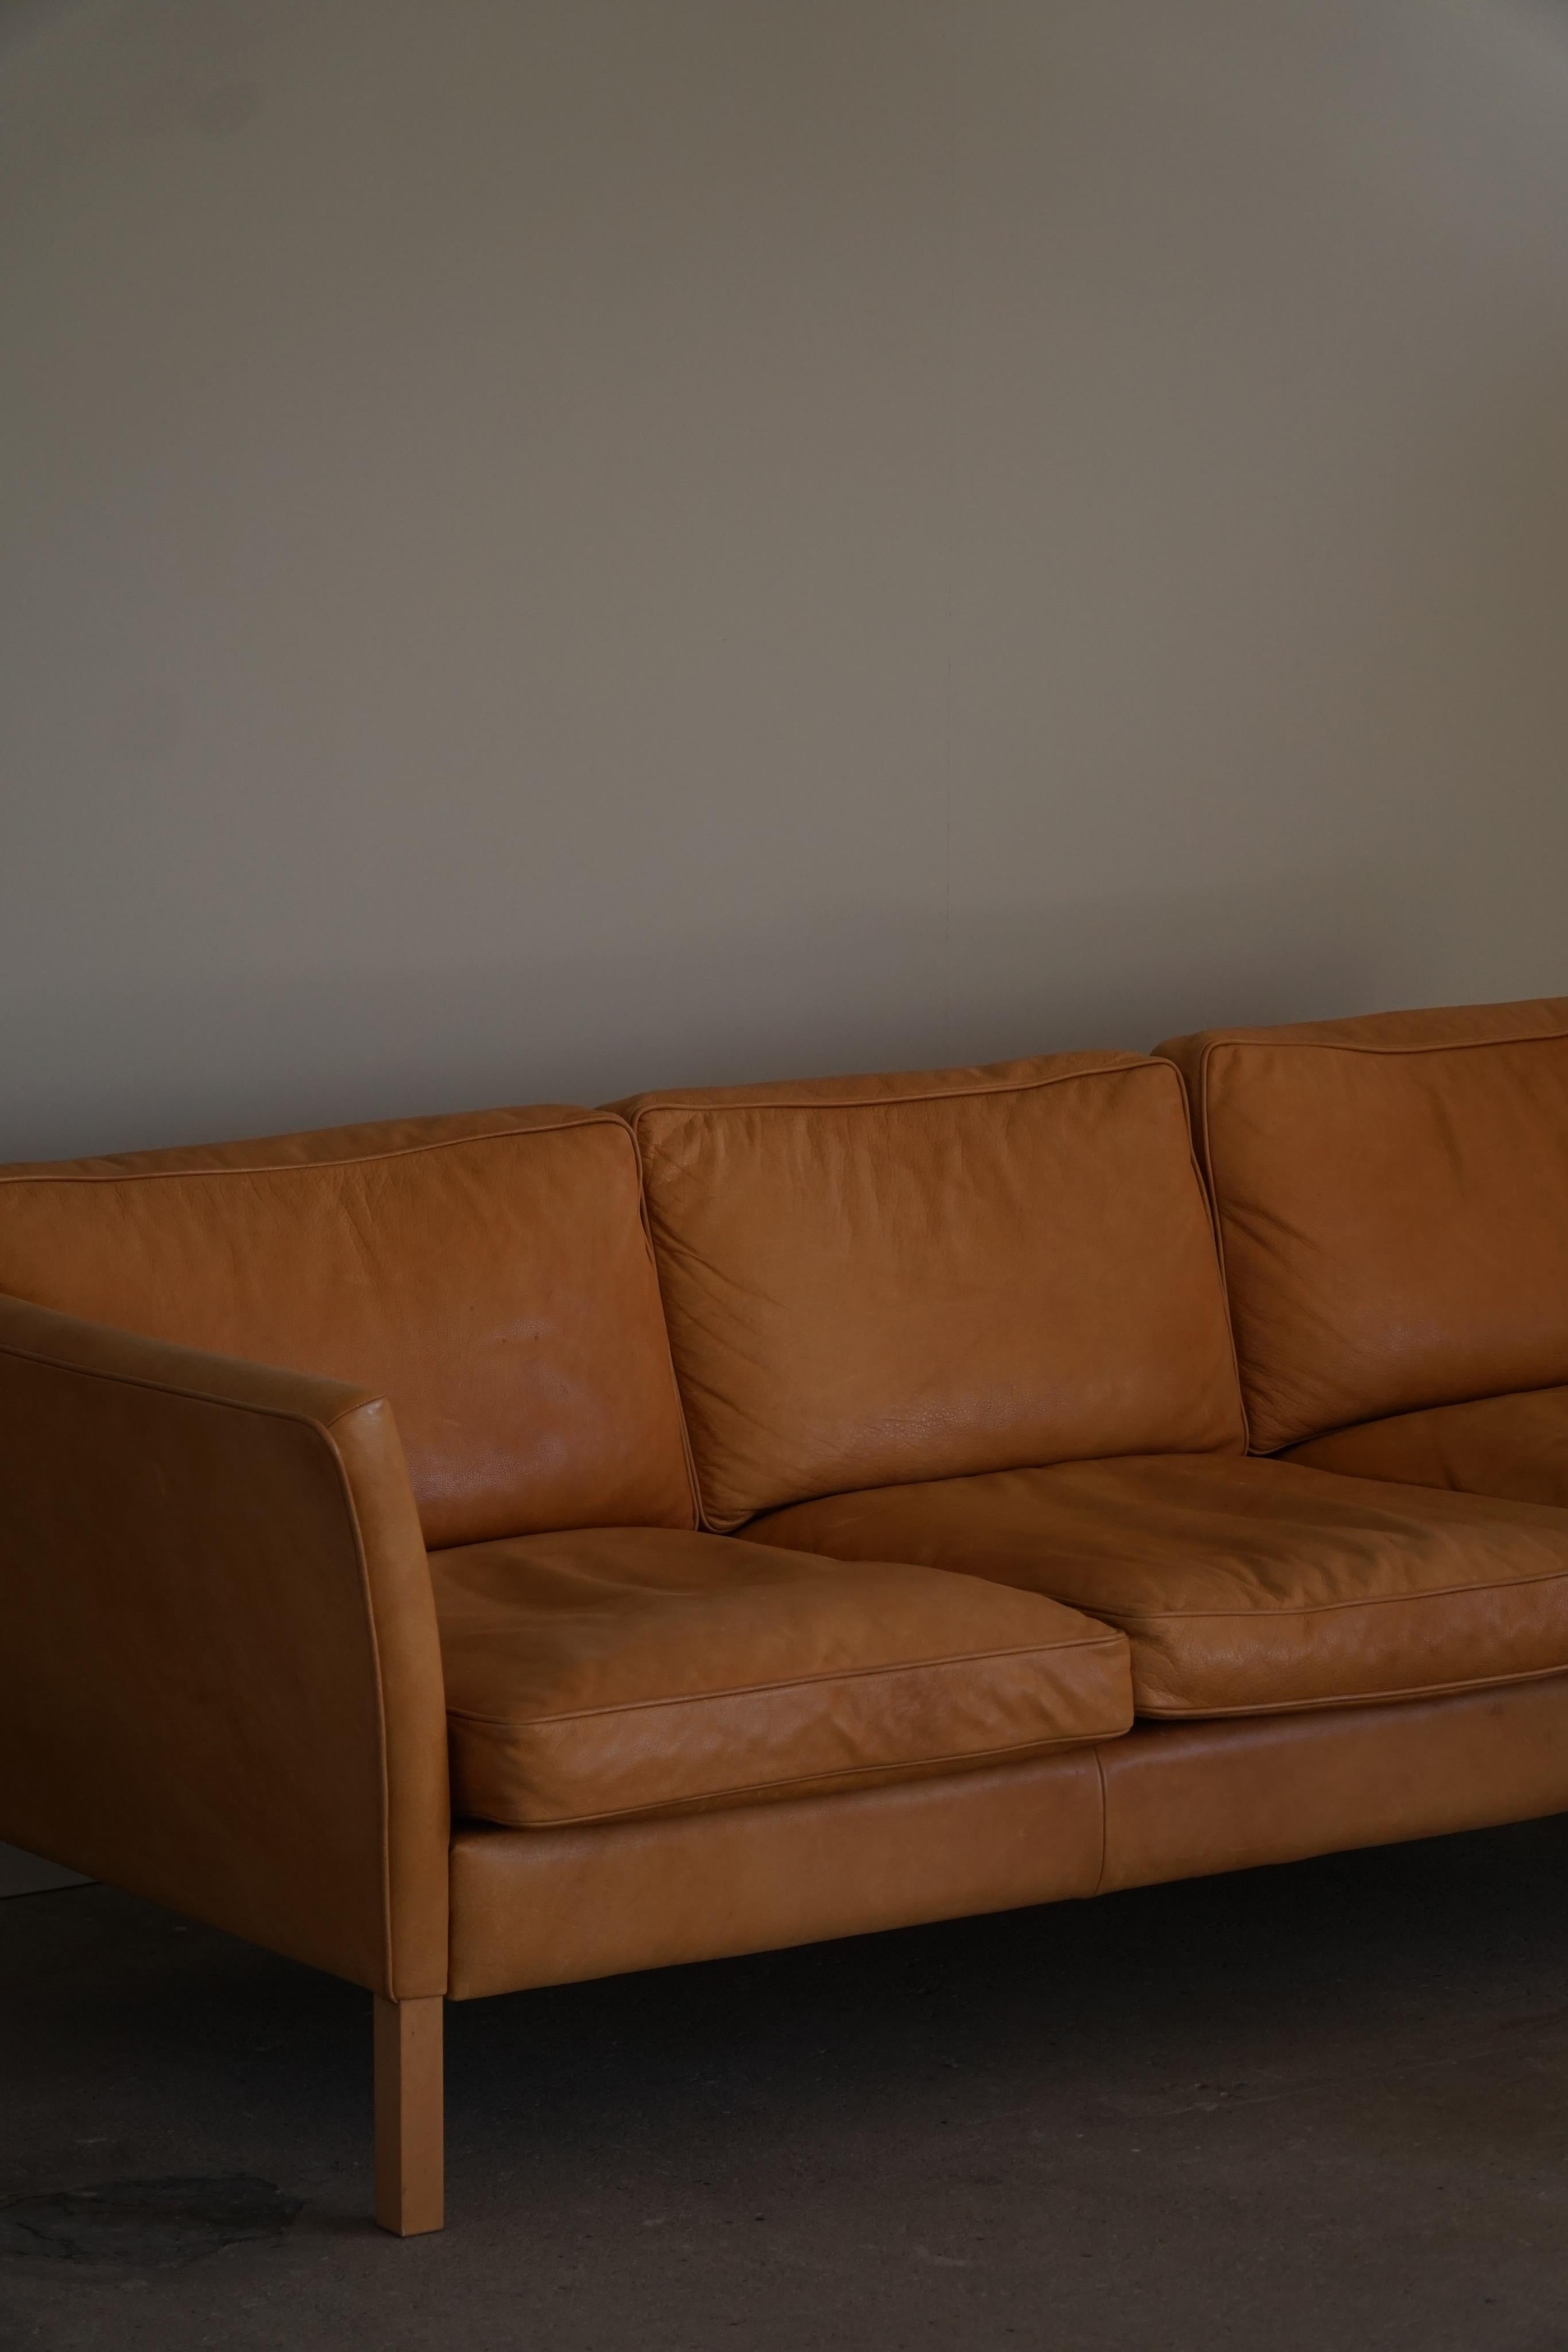 Danish Midcentury Stouby 3-Seater Sofa in Cognac Brown Leather, Made in 1970s For Sale 12